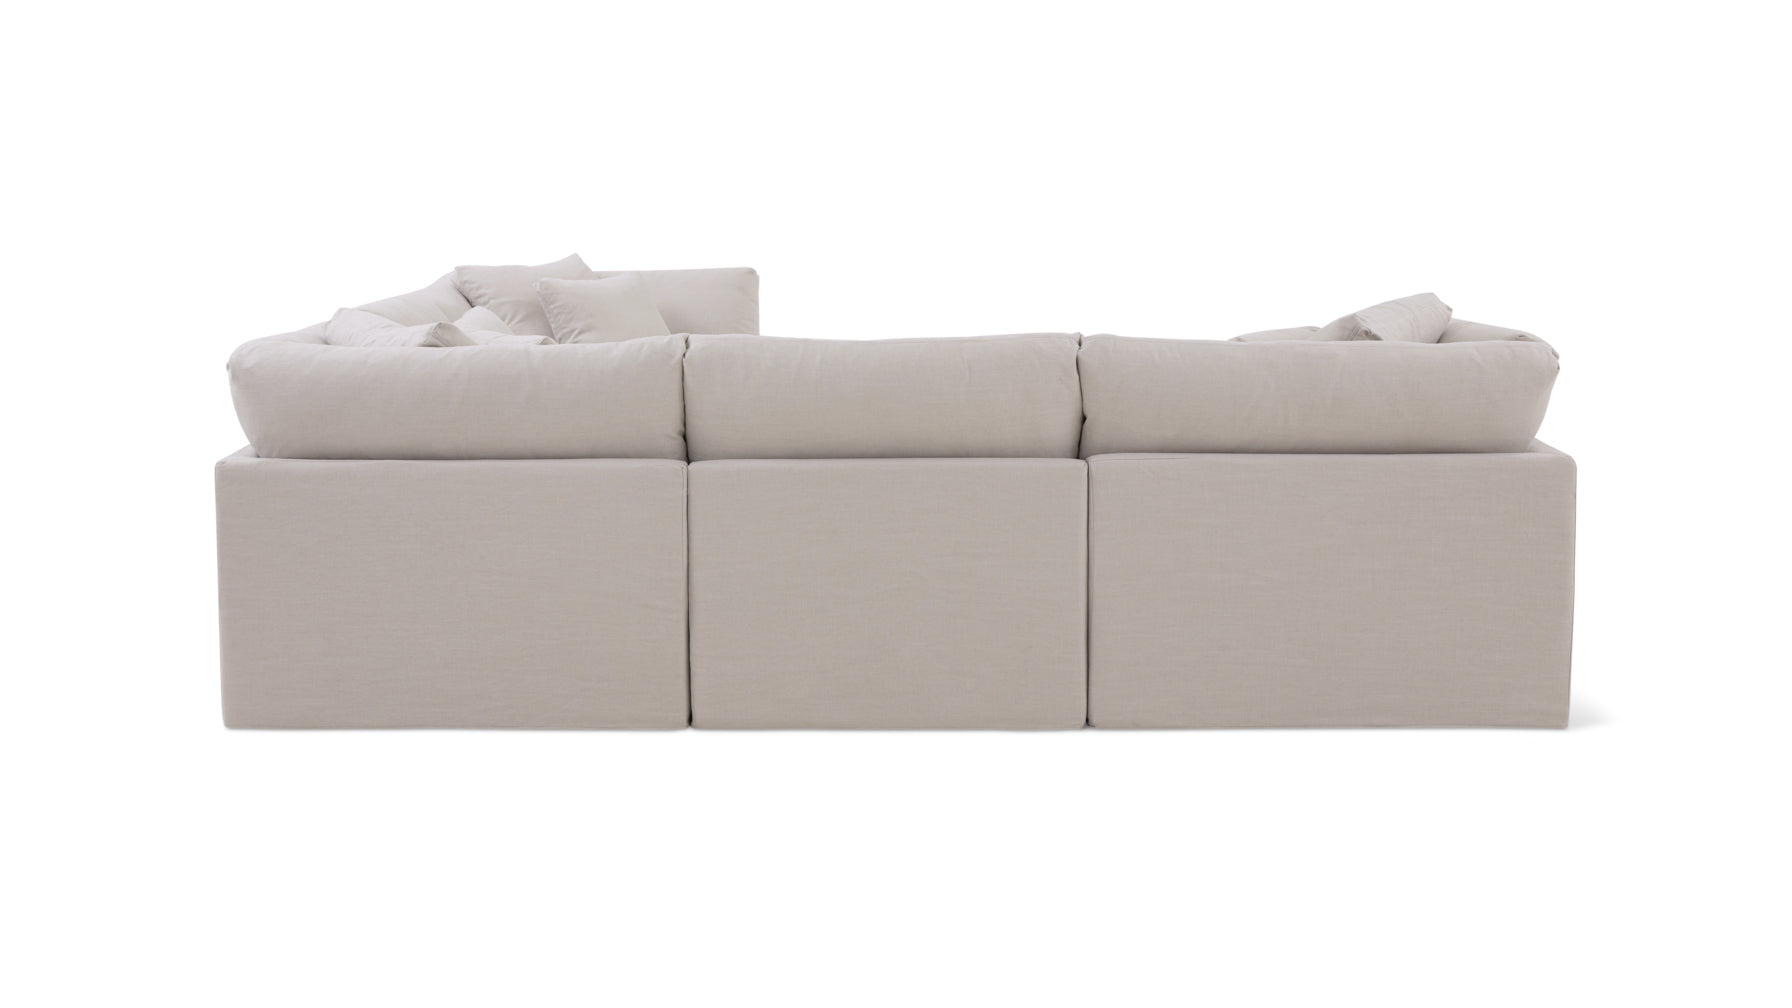 Get Together™ 5-Piece Modular Sectional Closed, Large, Clay - Image 6